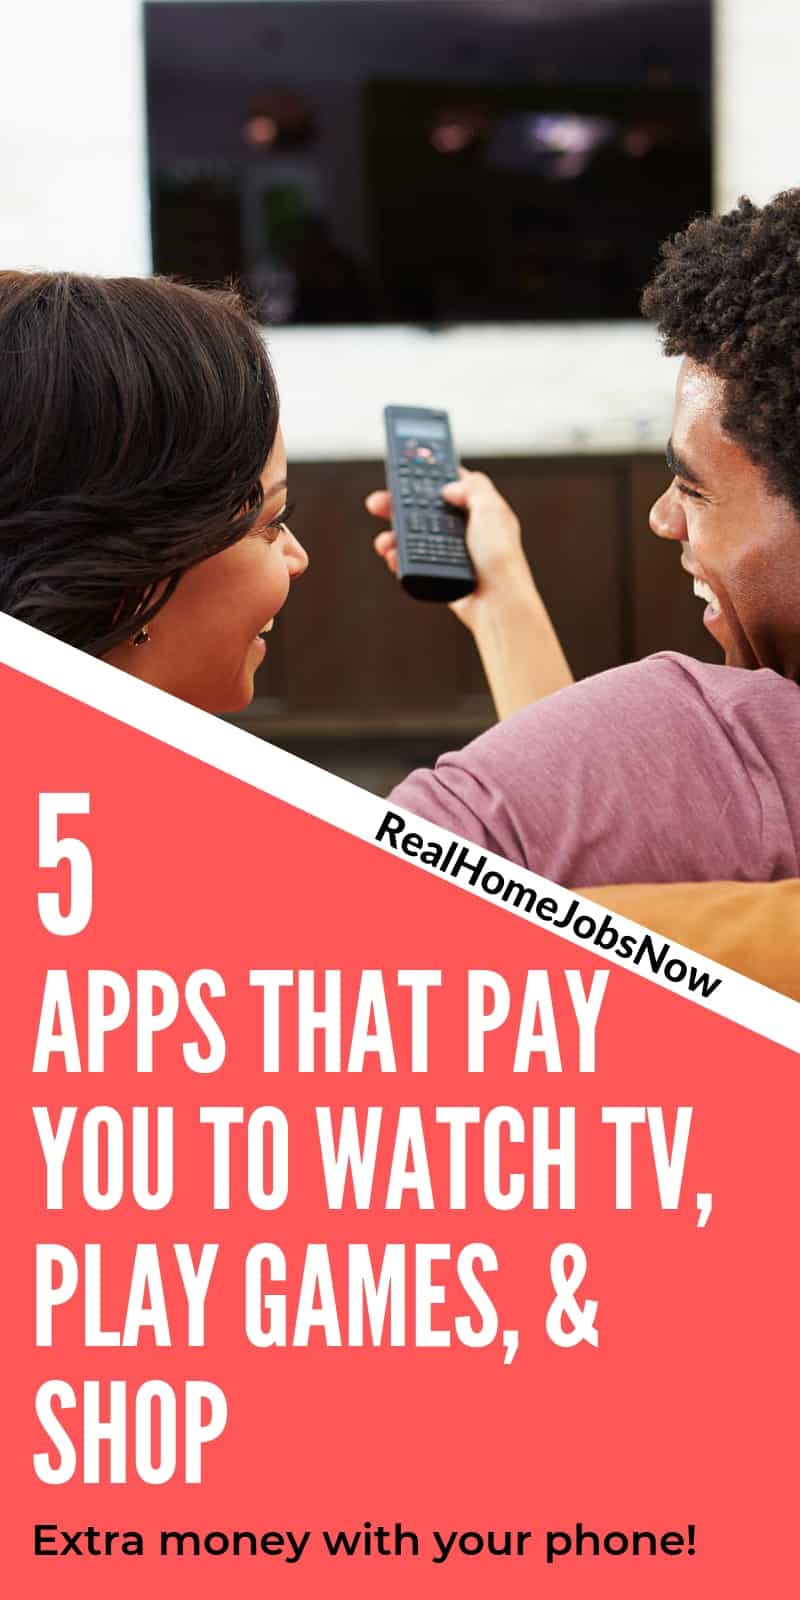 Get rewarded for activities you're doing anyway! Get paid to watch TV and videos, shop online, play games, and more!